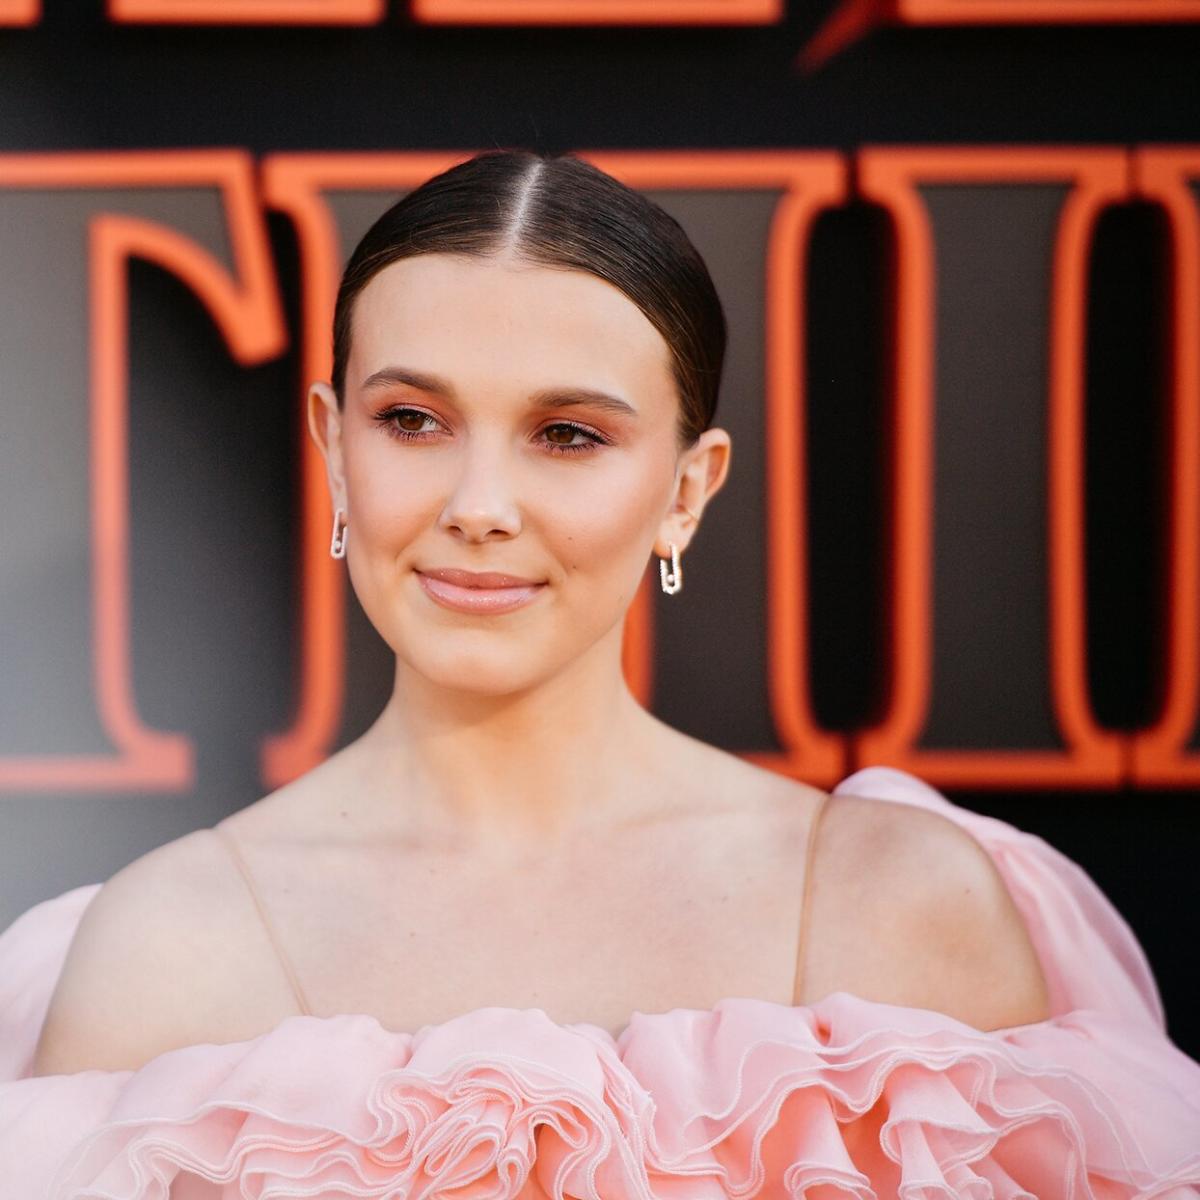 Millie Bobby Brown's Nighttime Skin Care Video Has Fans Questioning